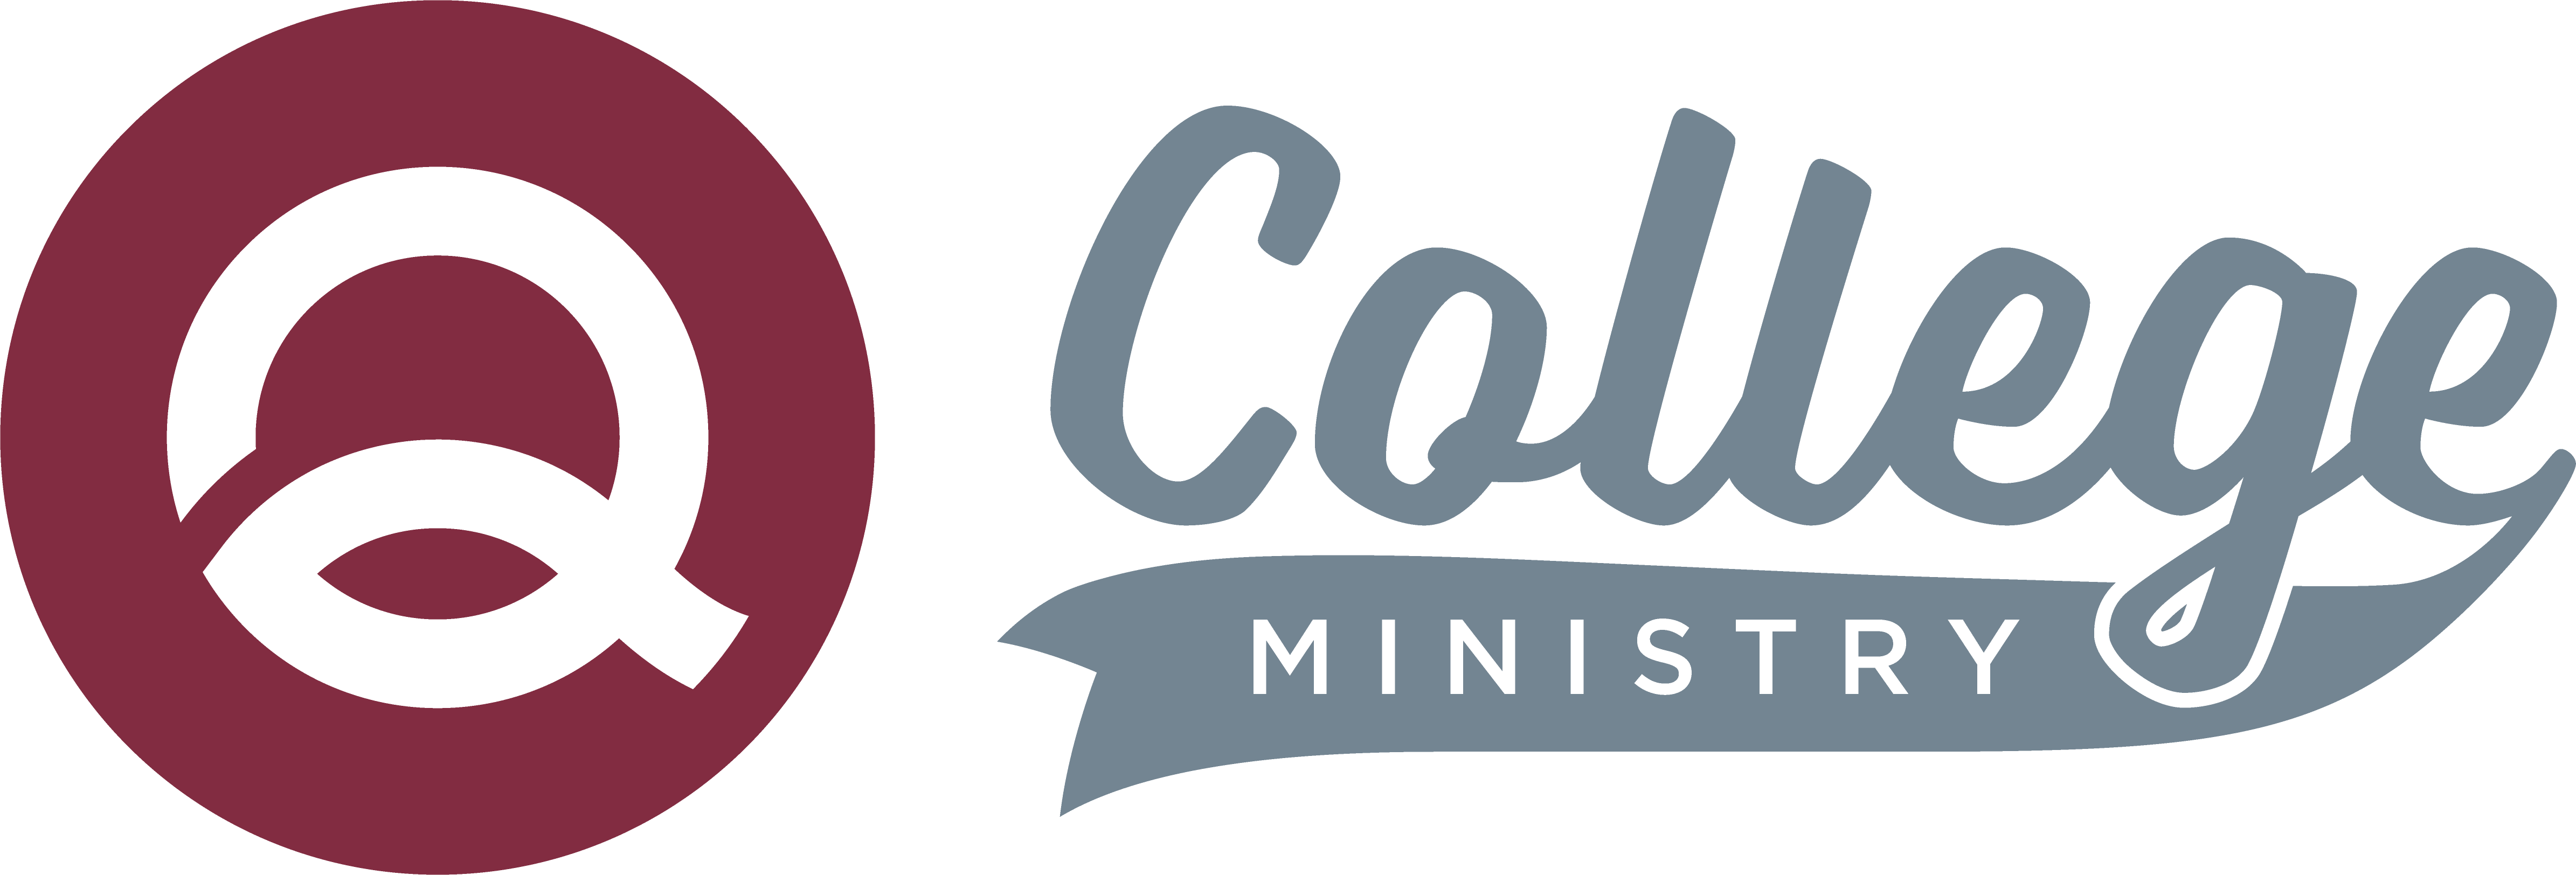 Q_College Ministry_Color Logo